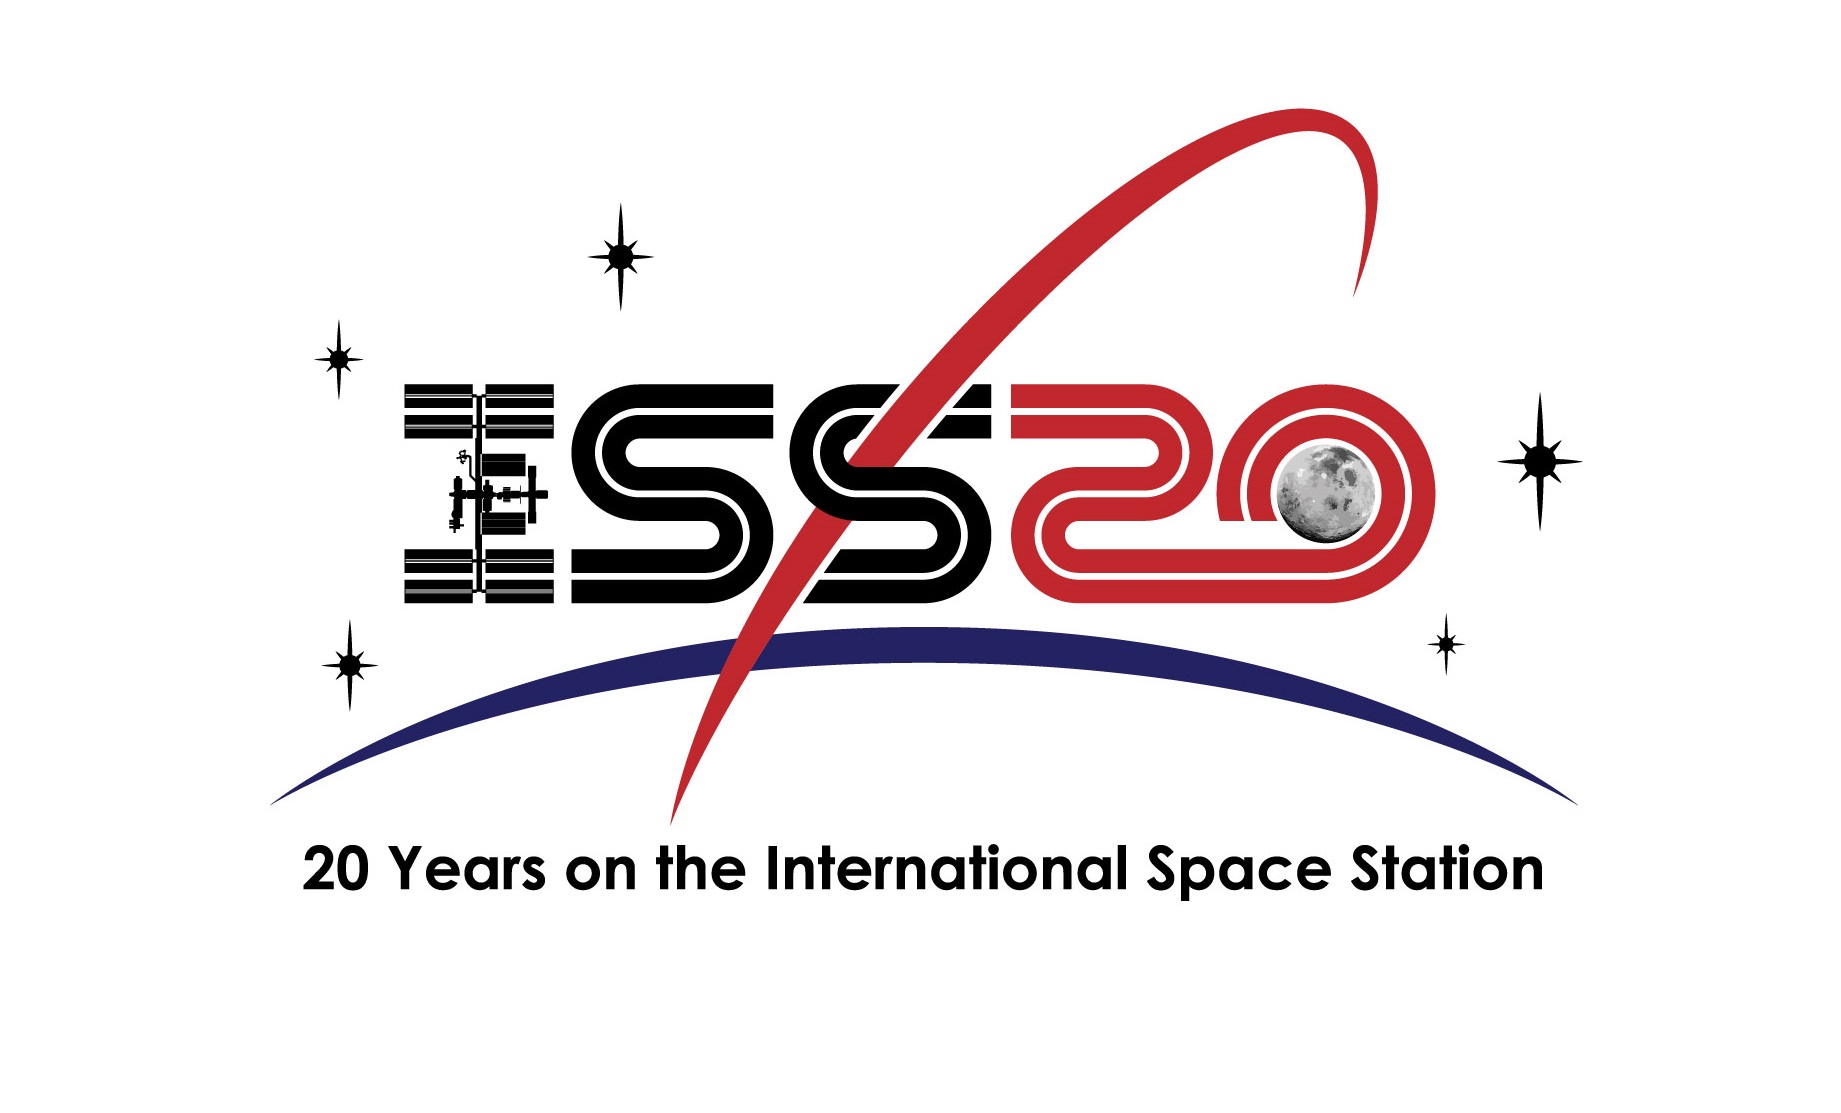 20 Years on the International Space Station.